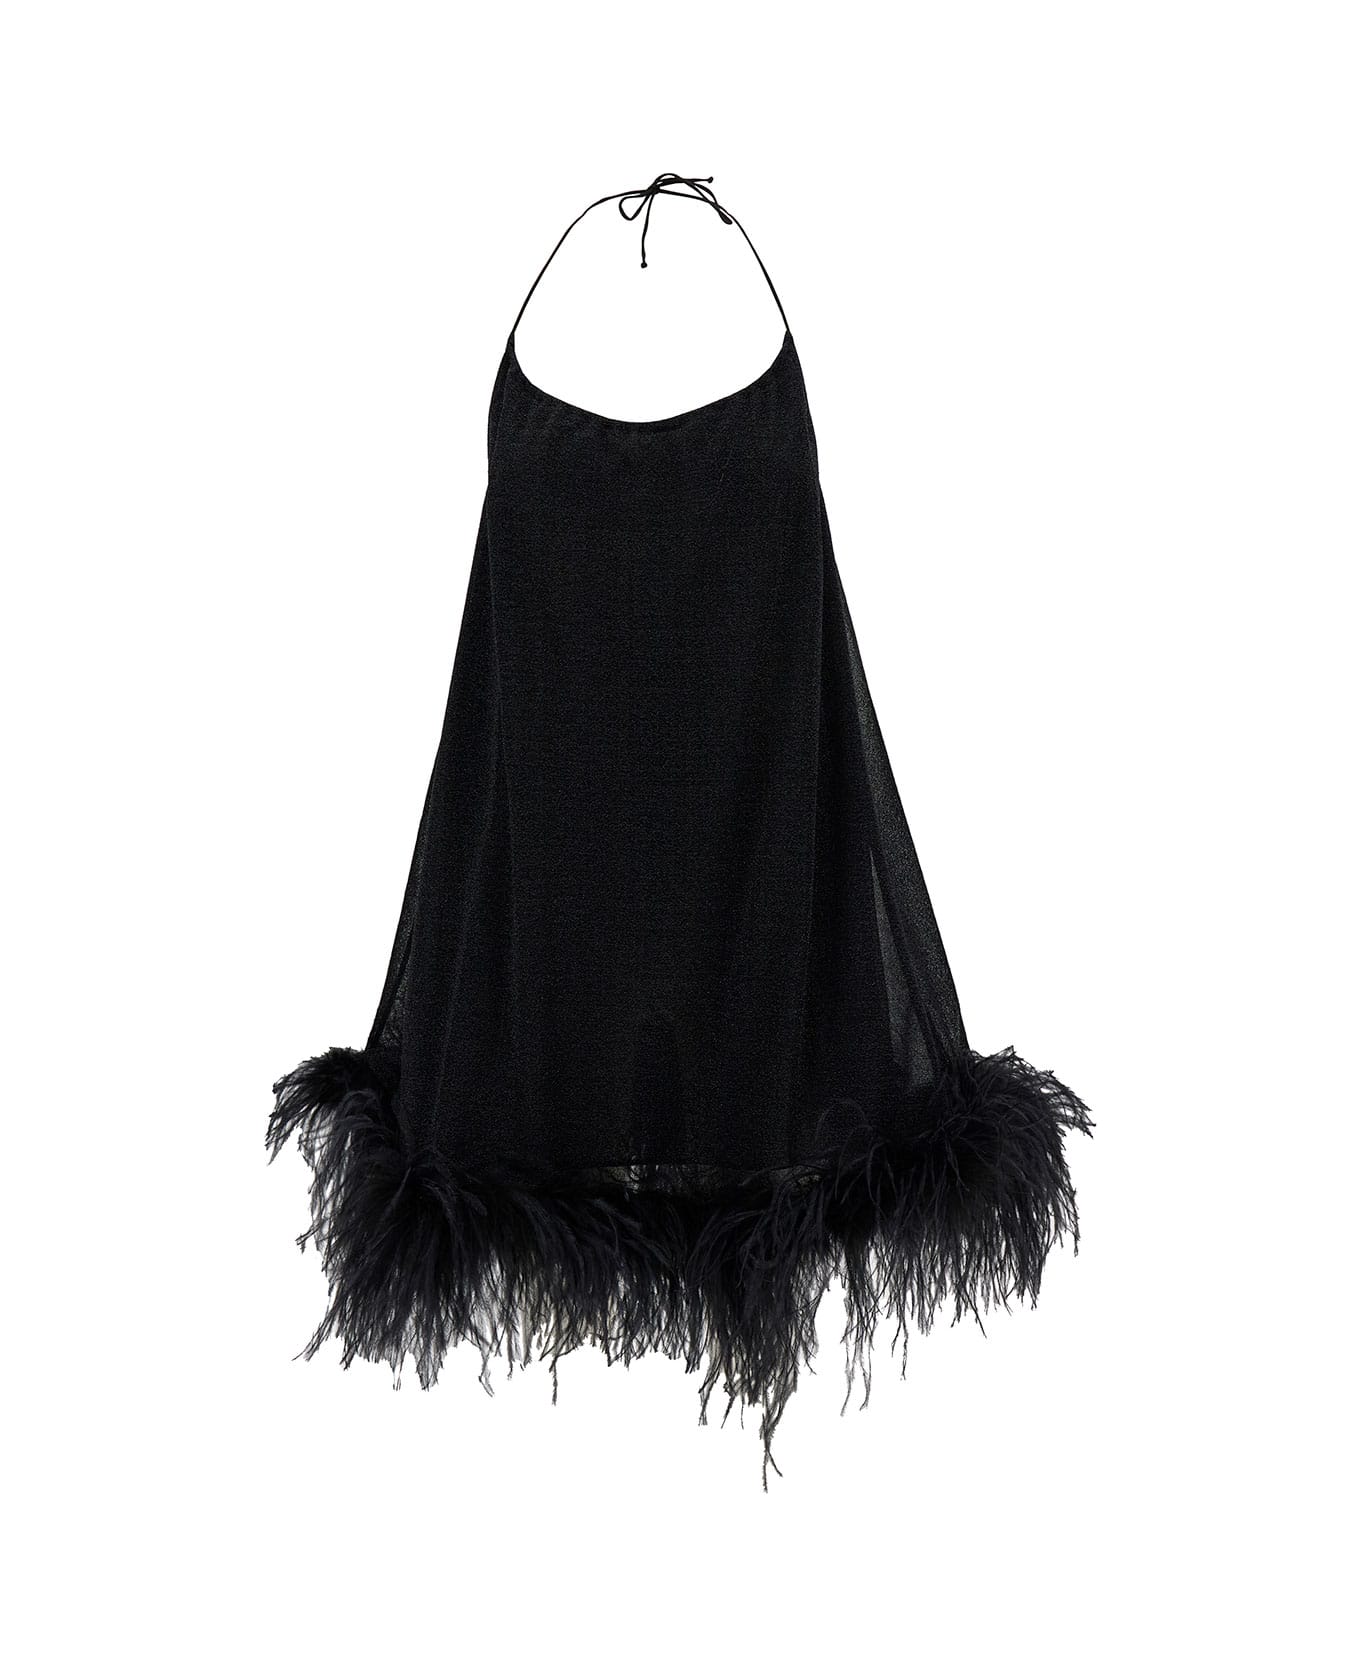 Oseree Mini Black Dress With Halterneck And Feathers In Polyamide Blend Woman - Black ワンピース＆ドレス